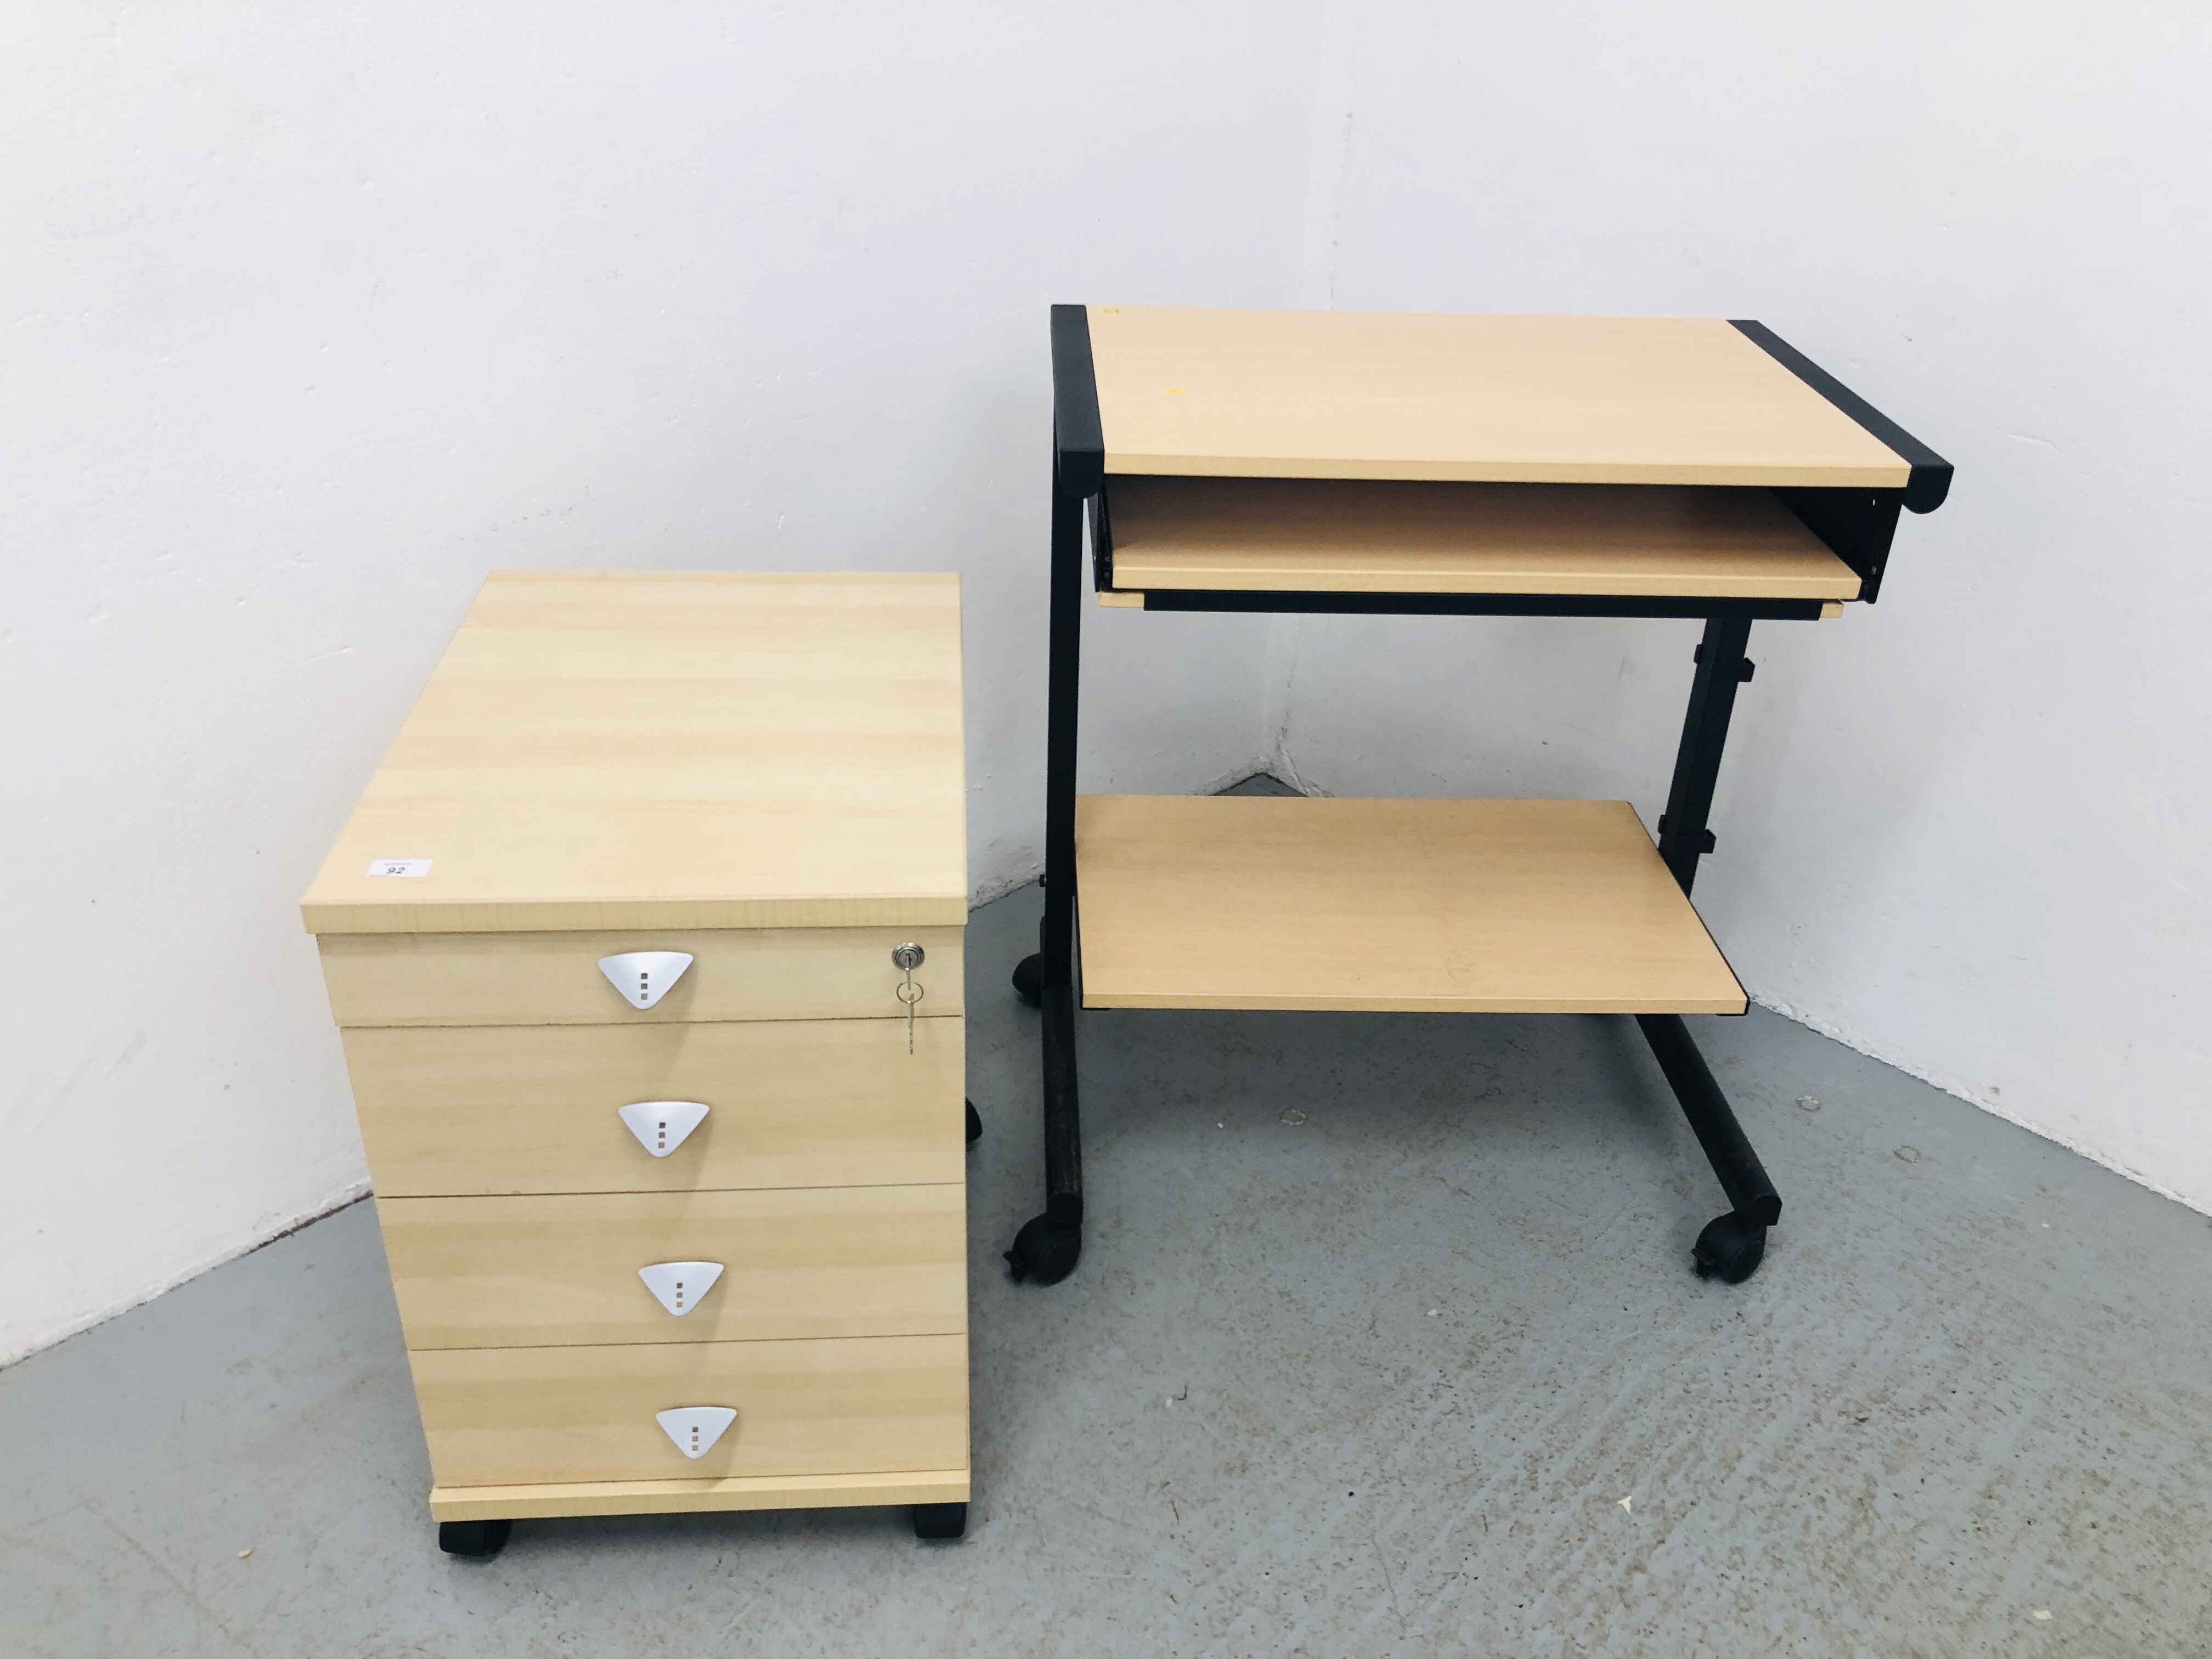 A MODERN 4 DRAWER BEECH FINISH HOME FILING UNIT AND A GOOD QUALITY BEECHWOOD FINISH HOME OFFICE